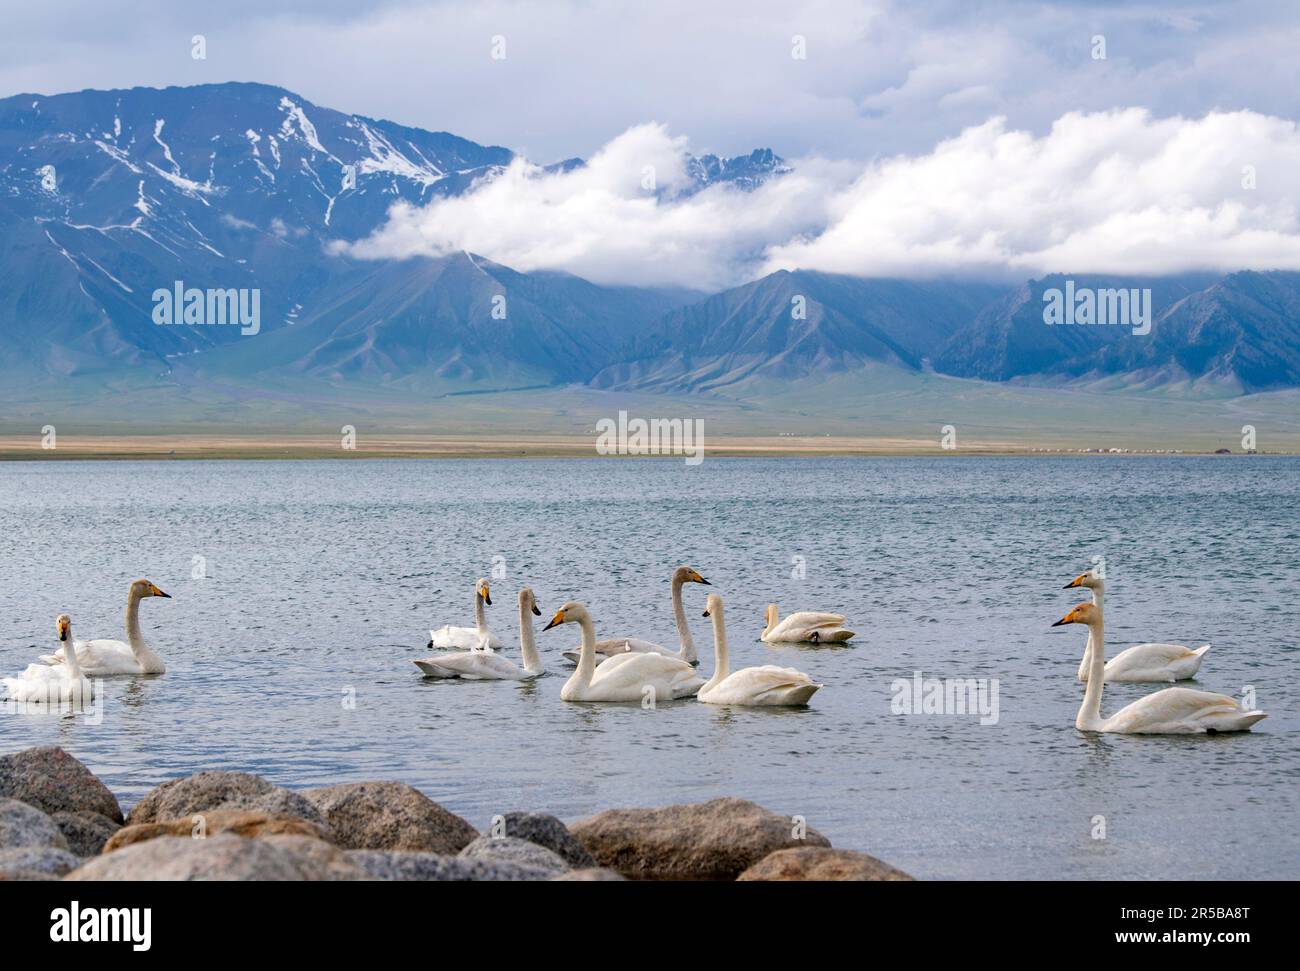 (230602) -- URUMQI, June 2, 2023 (Xinhua) -- Swans are seen in the Sayram Lake in northwest China's Xinjiang Uygur Autonomous Region, May 21, 2023. According to comprehensive calculation through a big data platform for tourism statistics and sample survey, from January to April 2023, Xinjiang received over 51.19 million tourists, a year-on-year increase of 29.56%. Meanwhile, tourism revenue reached 42.64 billion yuan (about 6.03 billion U.S. dollars), up 60.59% year on year. (Xinhua/Wang Fei) Stock Photo